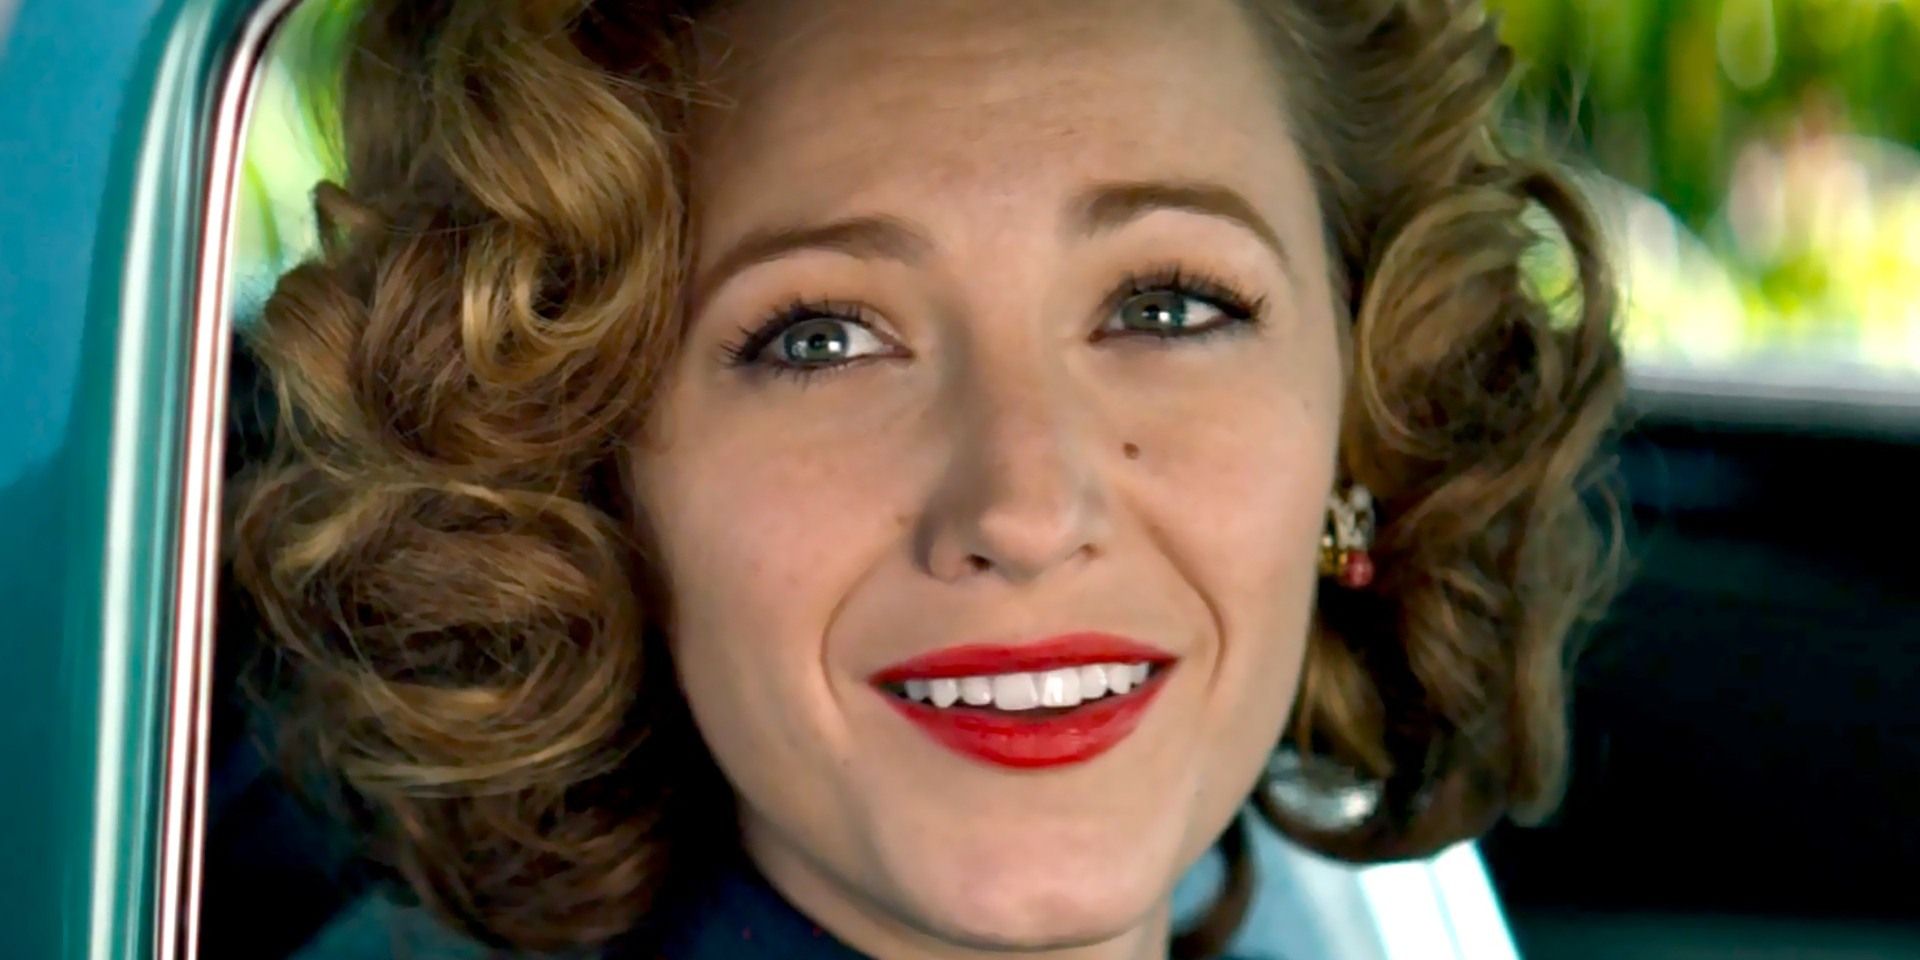 Blake Lively in '40s hair and makeup looks out the car window in The Age of Adaline